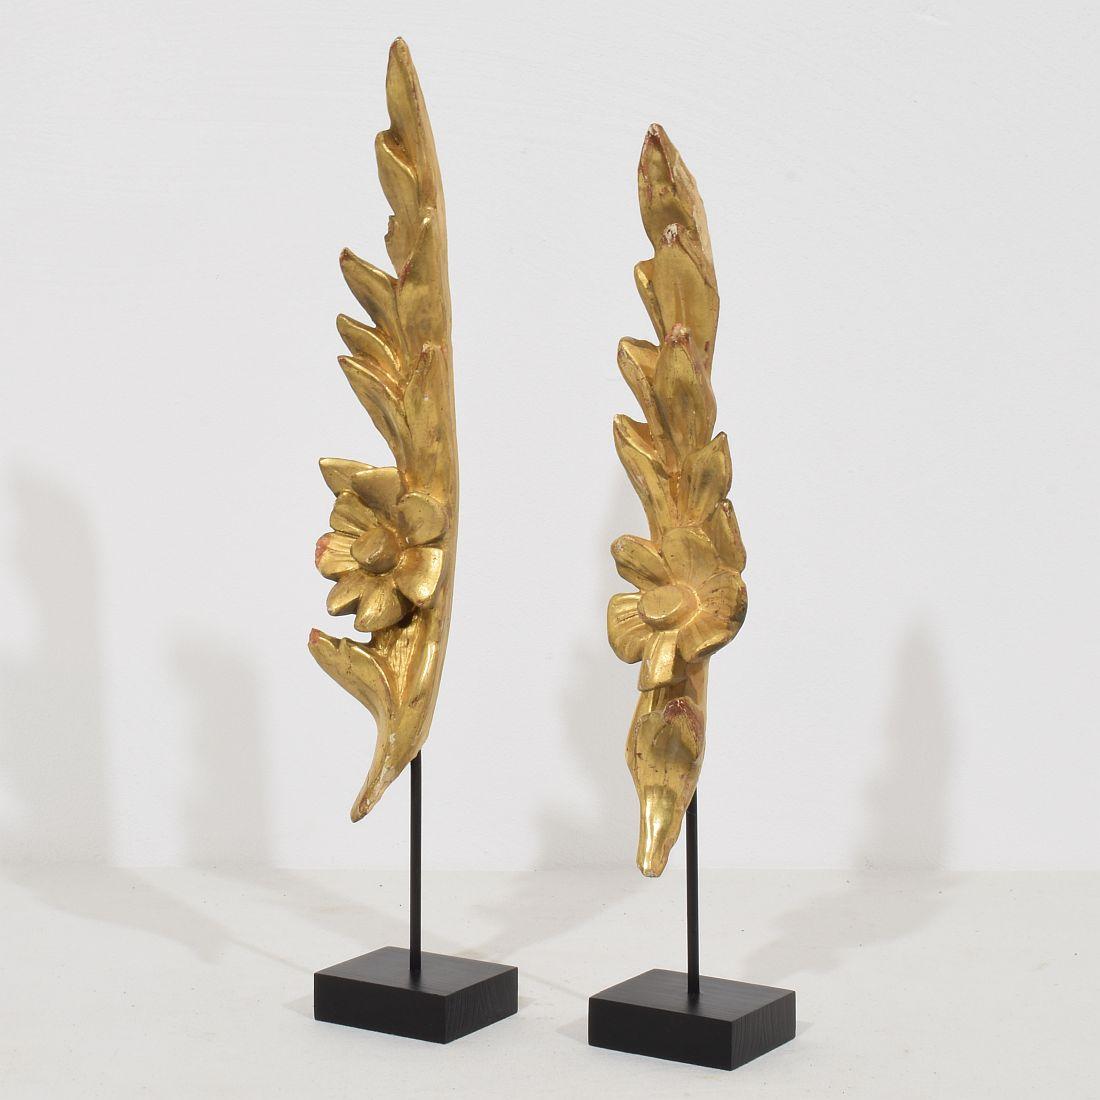 Nice couple of two small gilded Baroque style wooden ornaments,
Italy, circa 1850. Weathered and small losses. Measurement here below of the largest one and includes the wooden base.